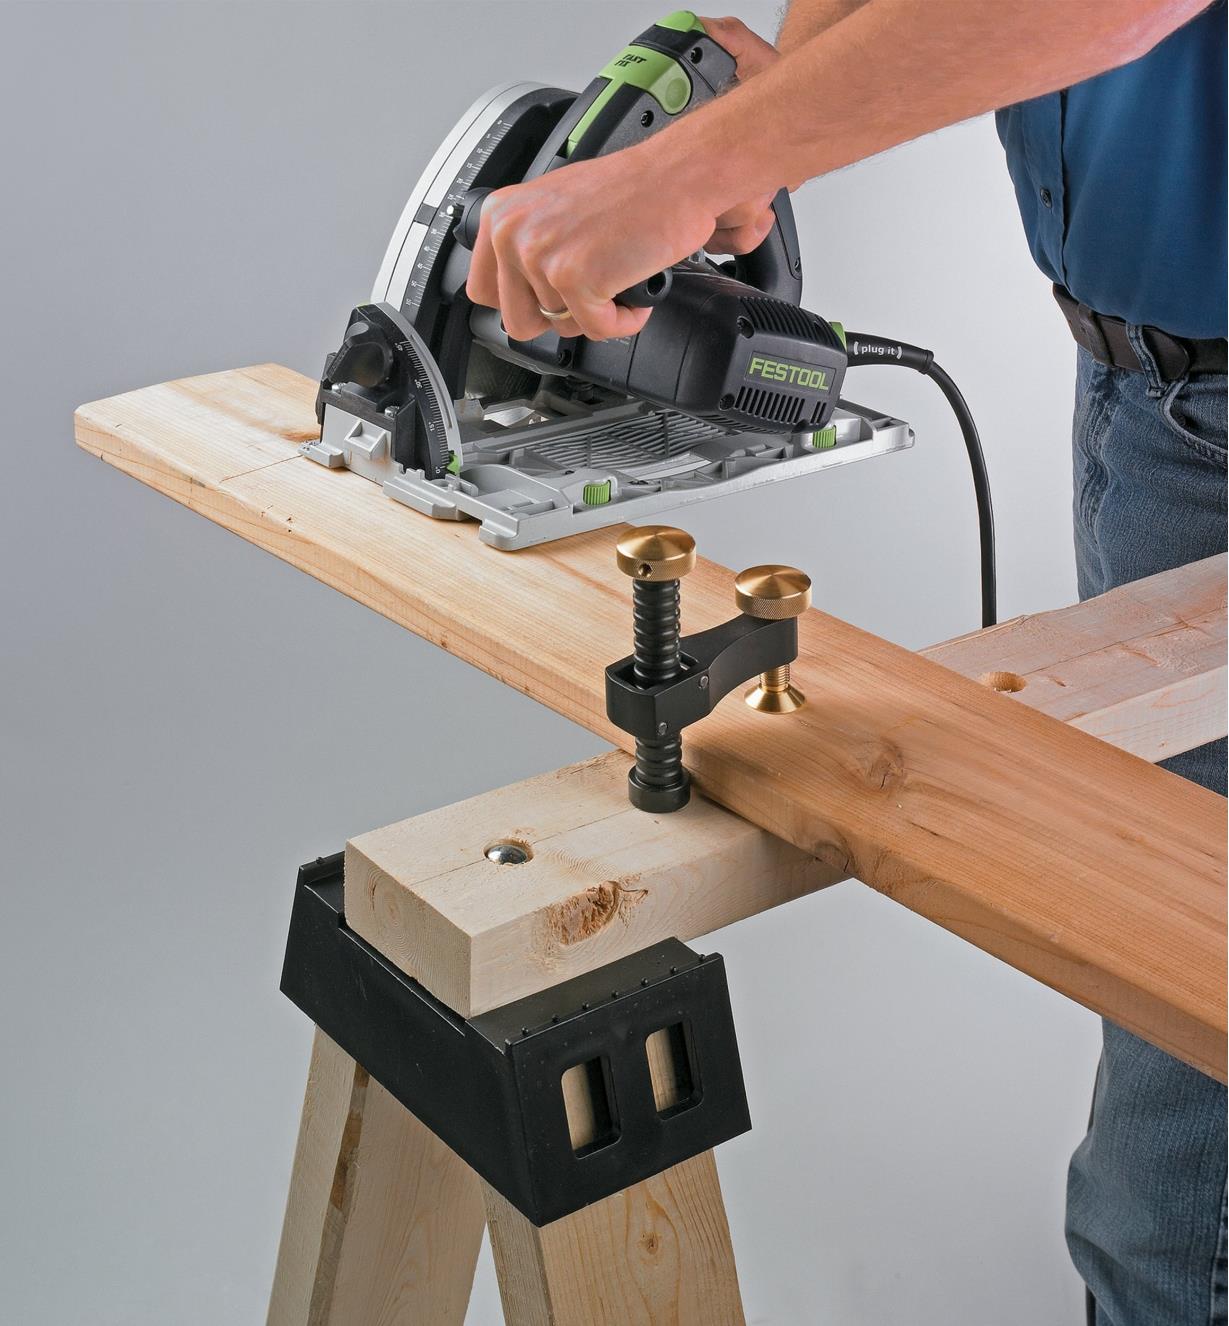 Using the surface clamp to hold a board on a sawhorse while cutting with a circular saw